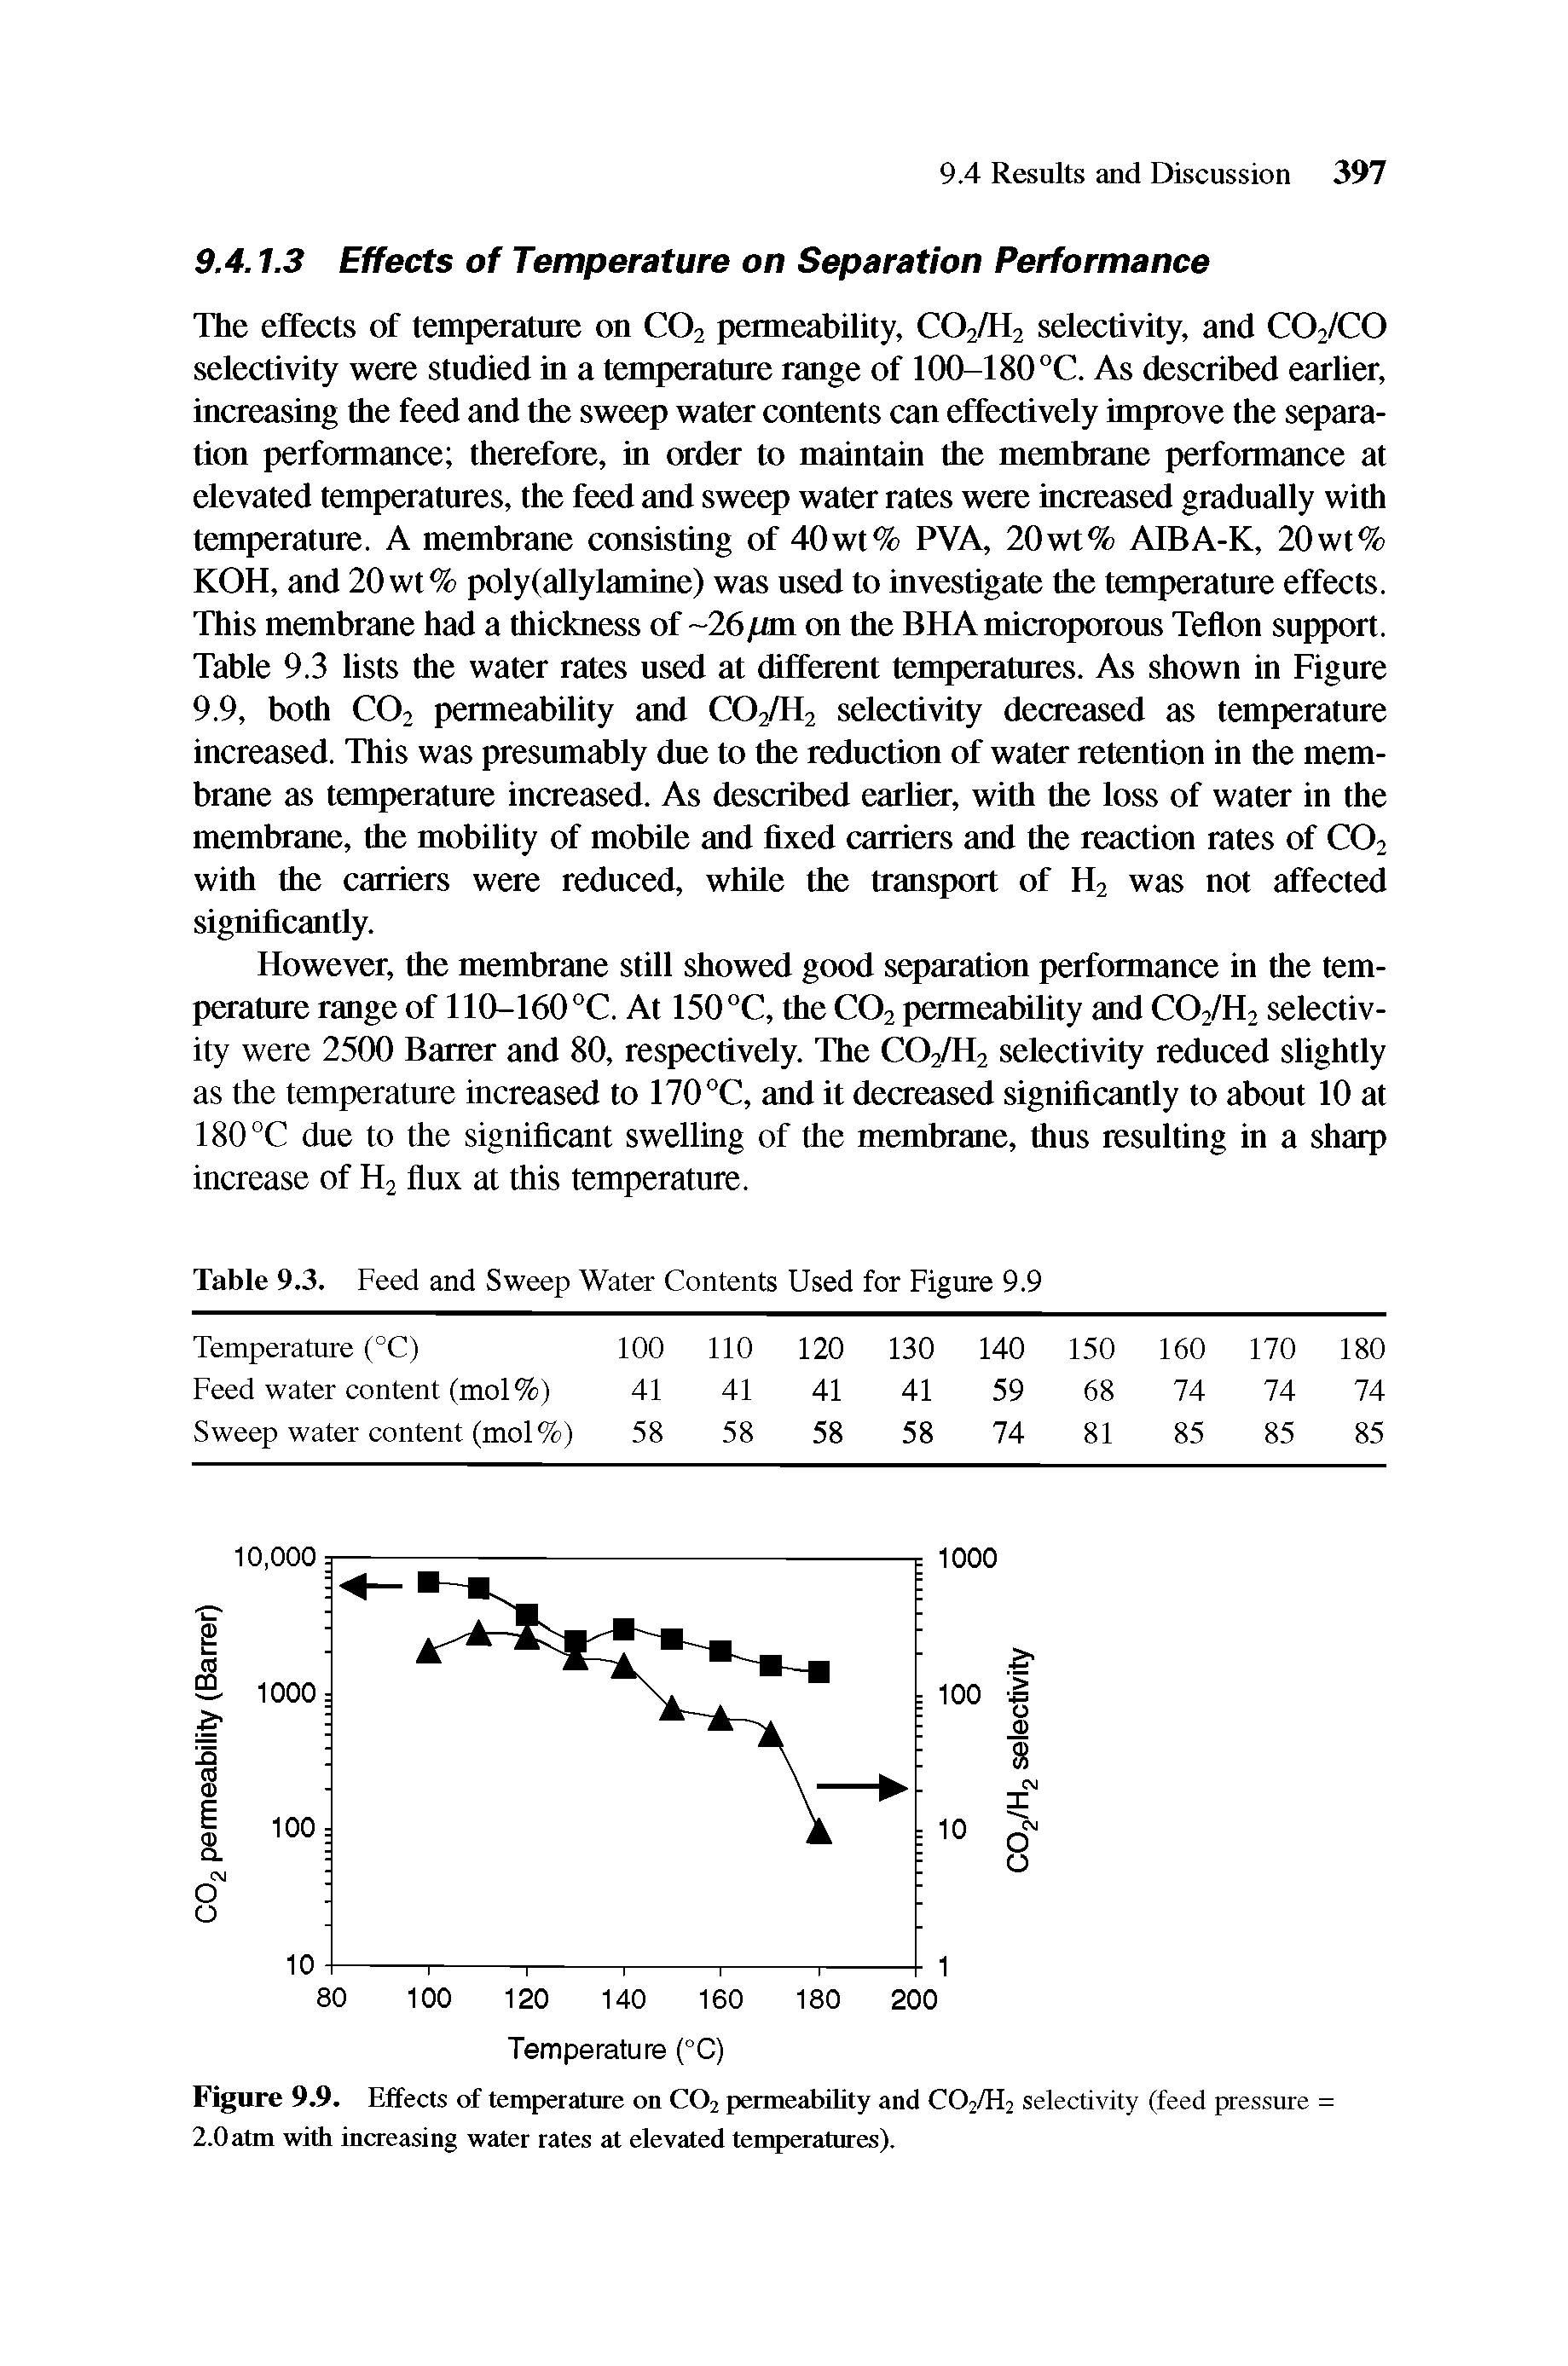 Figure 9.9. Effects of temperature on C02 per meability and C02/H2 selectivity (feed pressure = 2.0atm with increasing water rates at elevated temperatures).